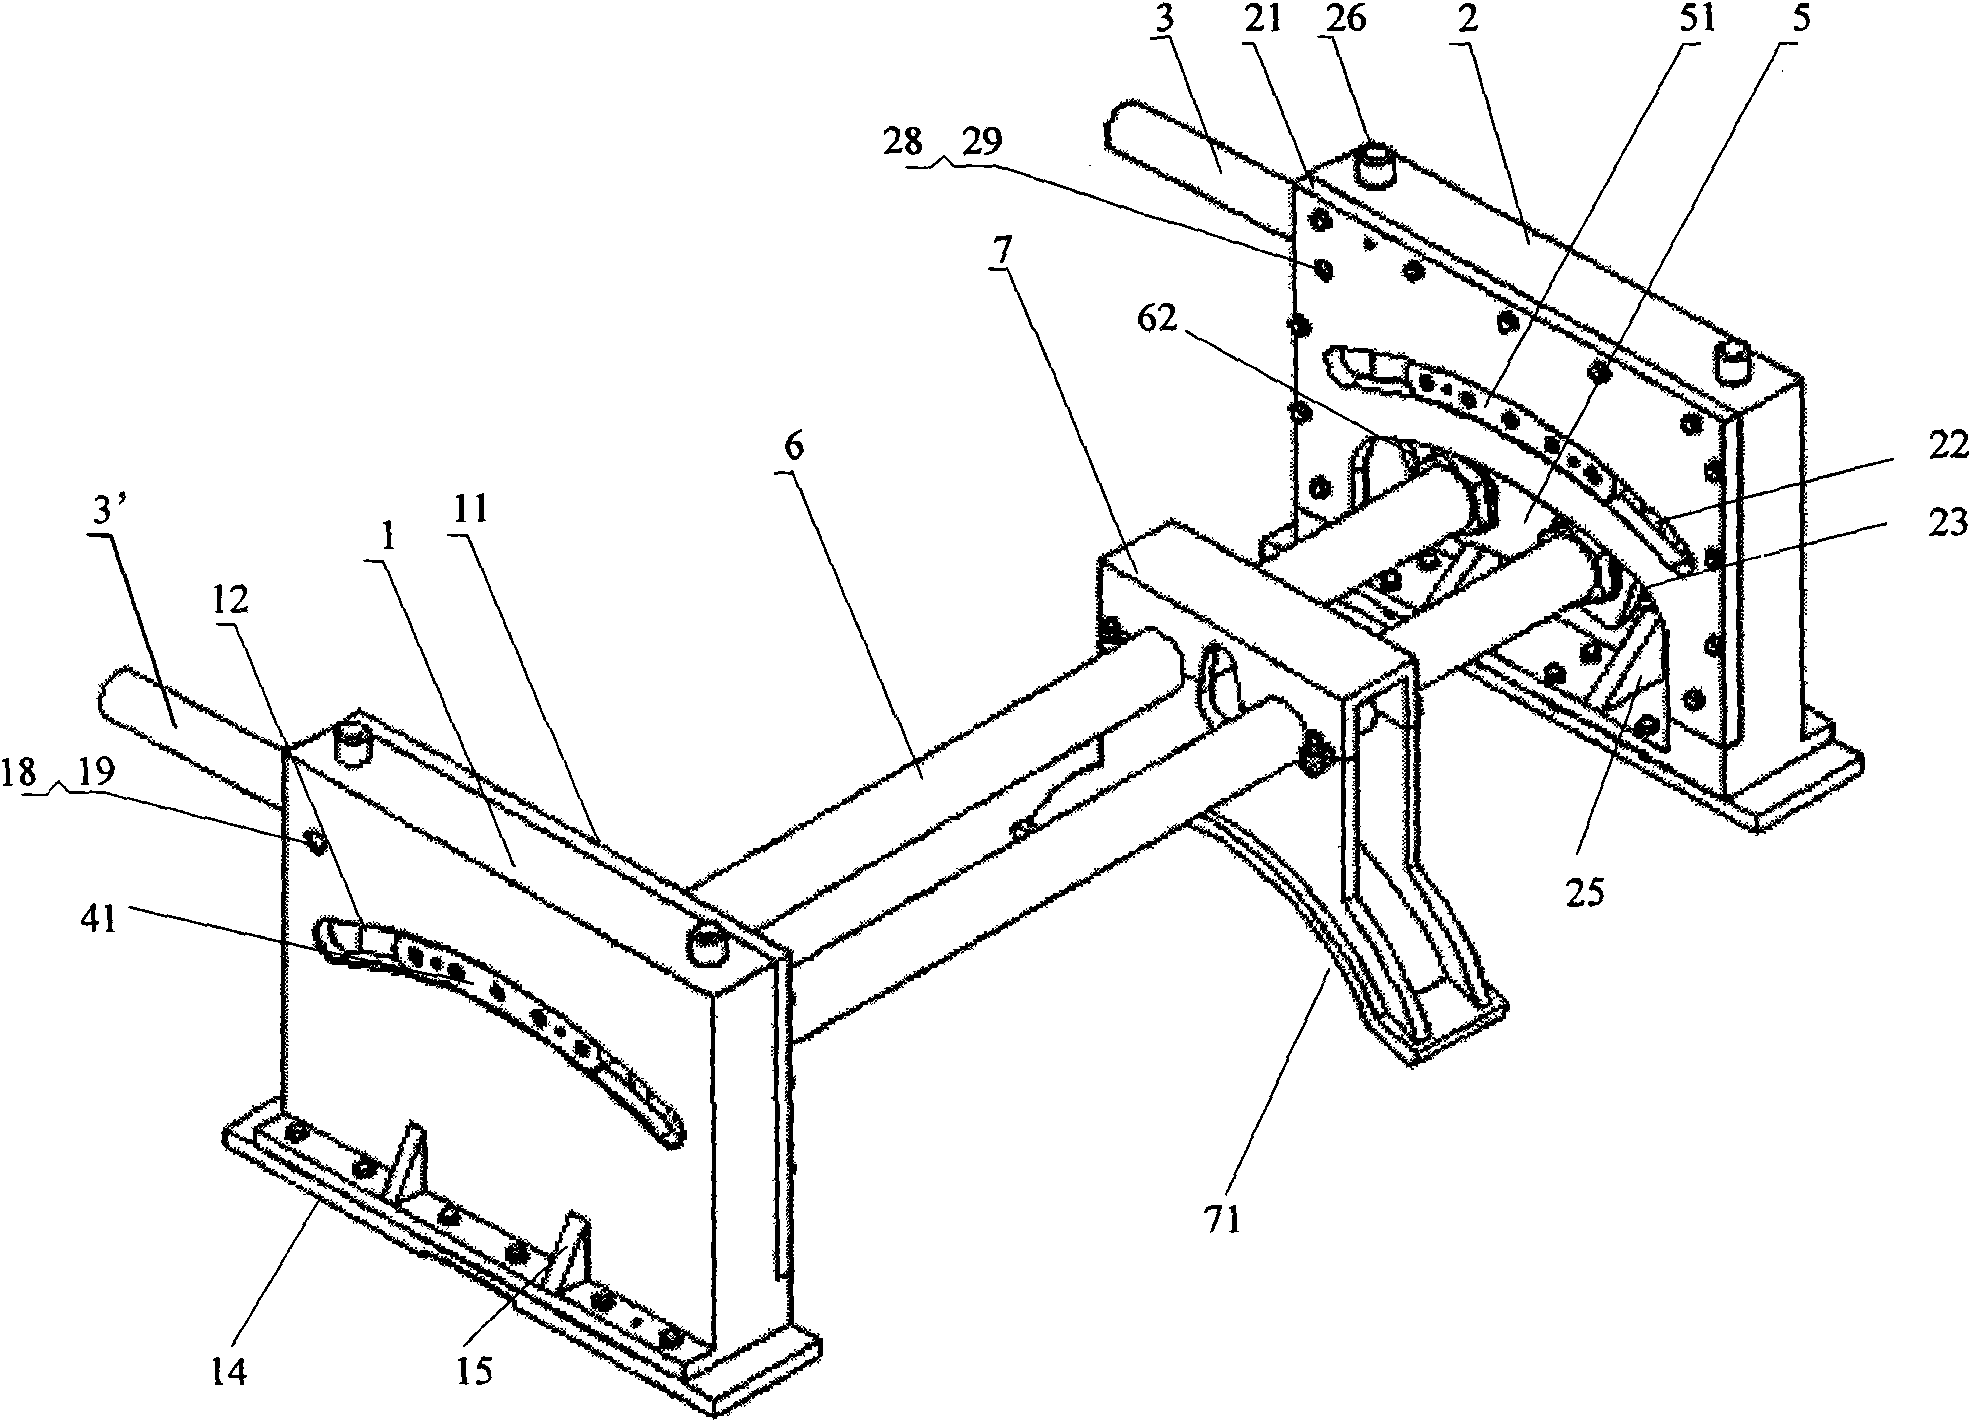 Control machine capable of carrying operation carrier to perform axial and circumferential motions relative to operation matrix